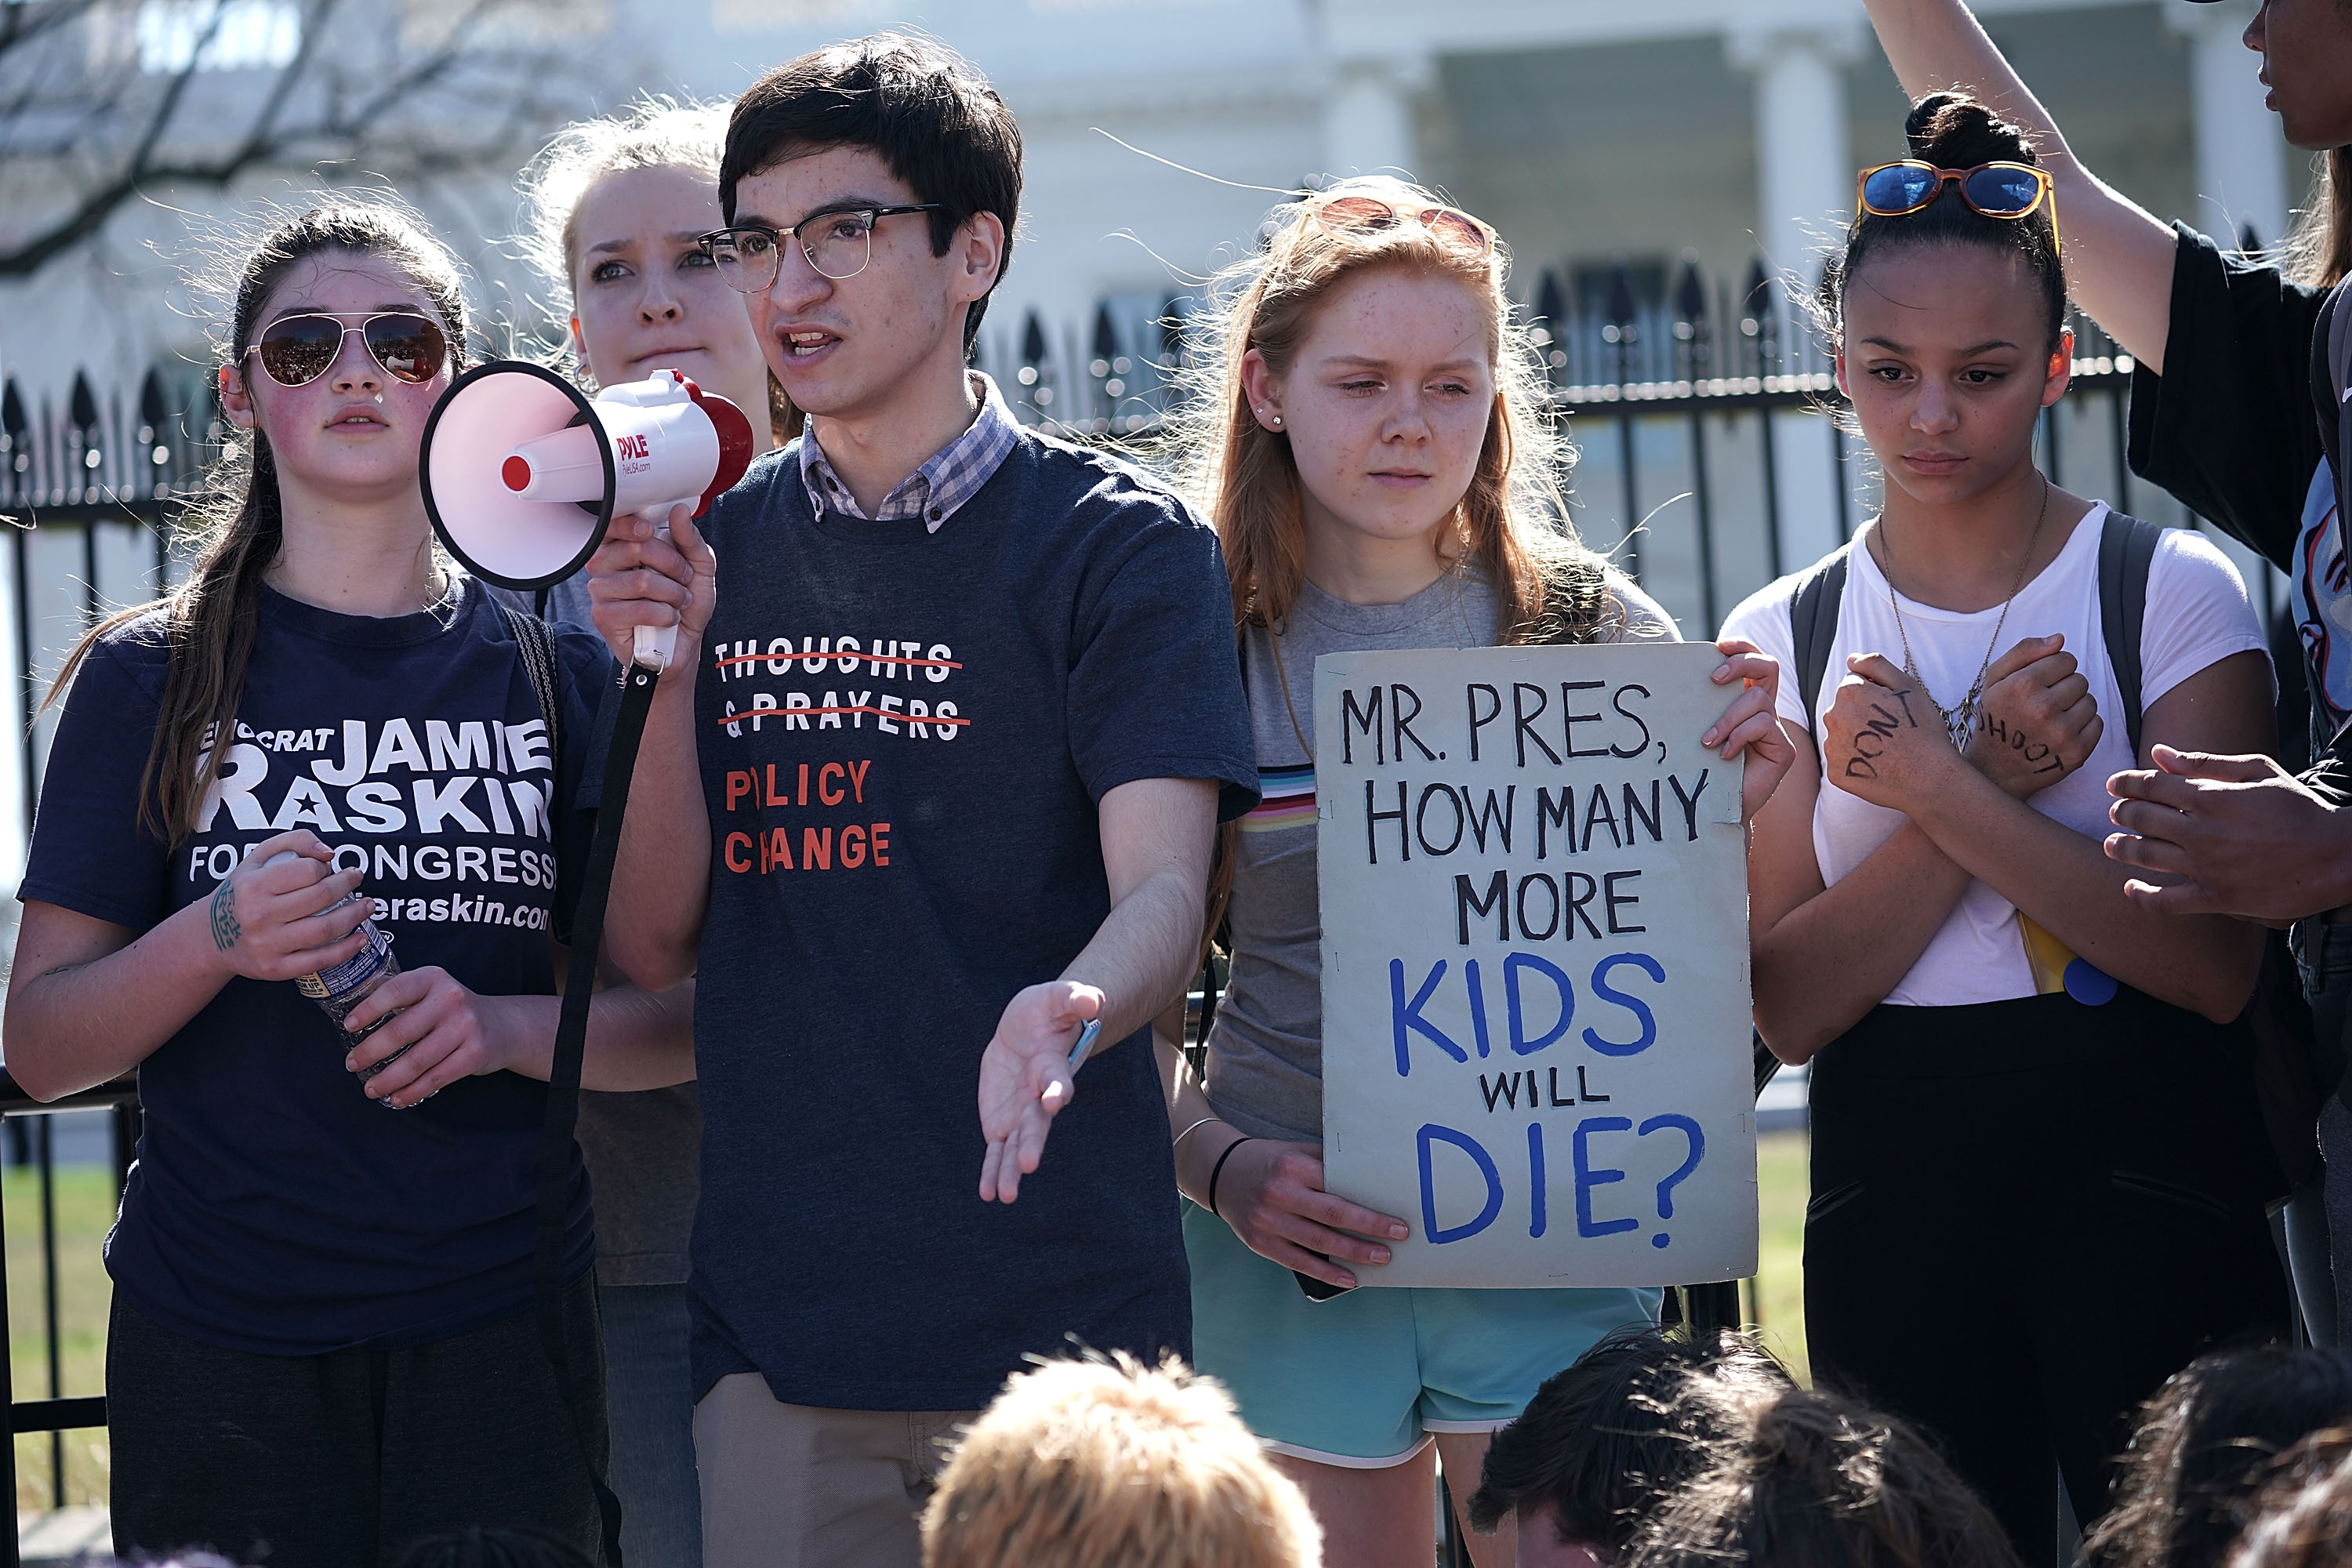 Students From A Maryland High School Organize Walkout And March On Capitol Demanding Gun Control Action From Congress